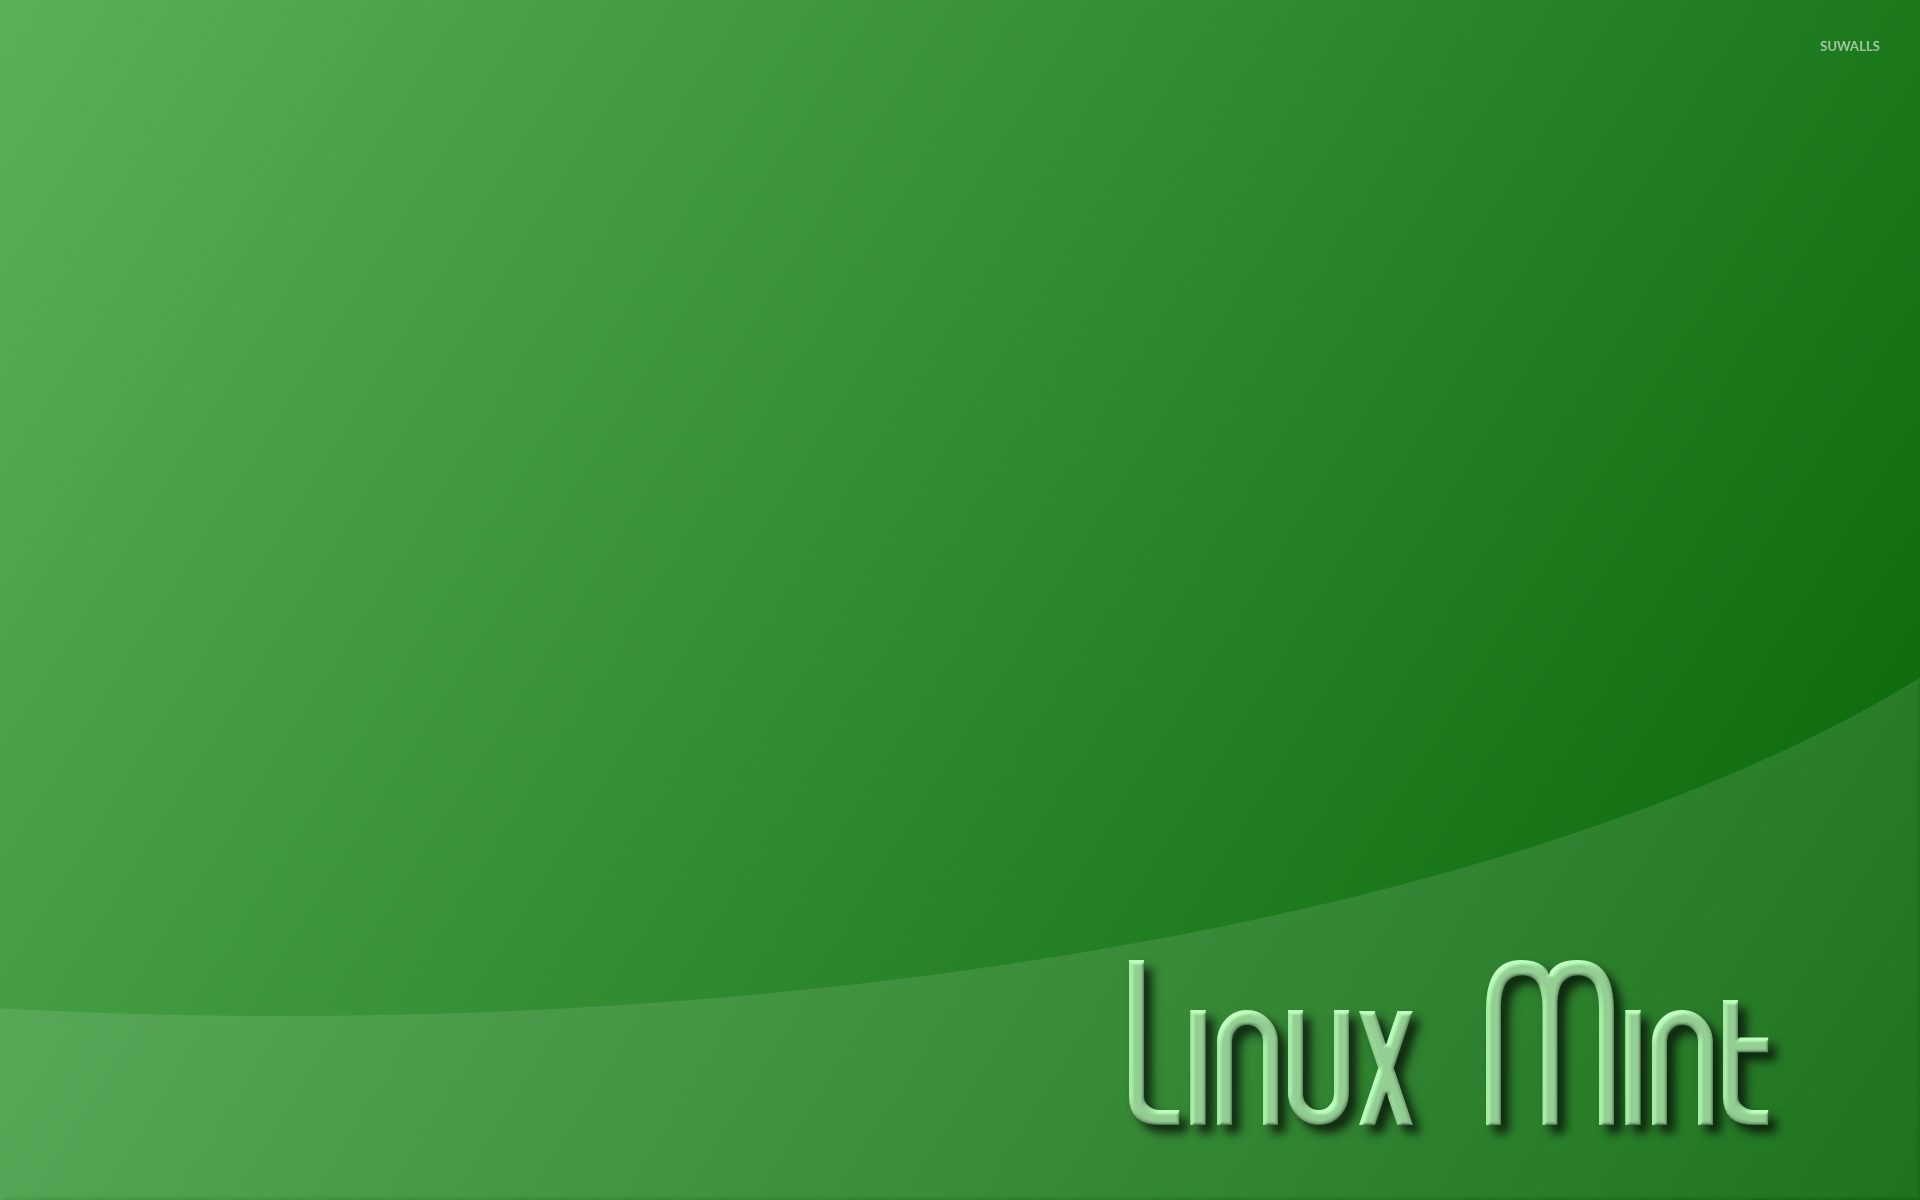 Free Download Linux Mint Wallpaper Computer Wallpapers 8144 1680x1050 For Your Desktop Mobile Tablet Explore 75 Linuxmint Wallpaper Best Linux Wallpaper Ubuntu Linux Wallpaper Linux Mint Wallpaper 19x1080